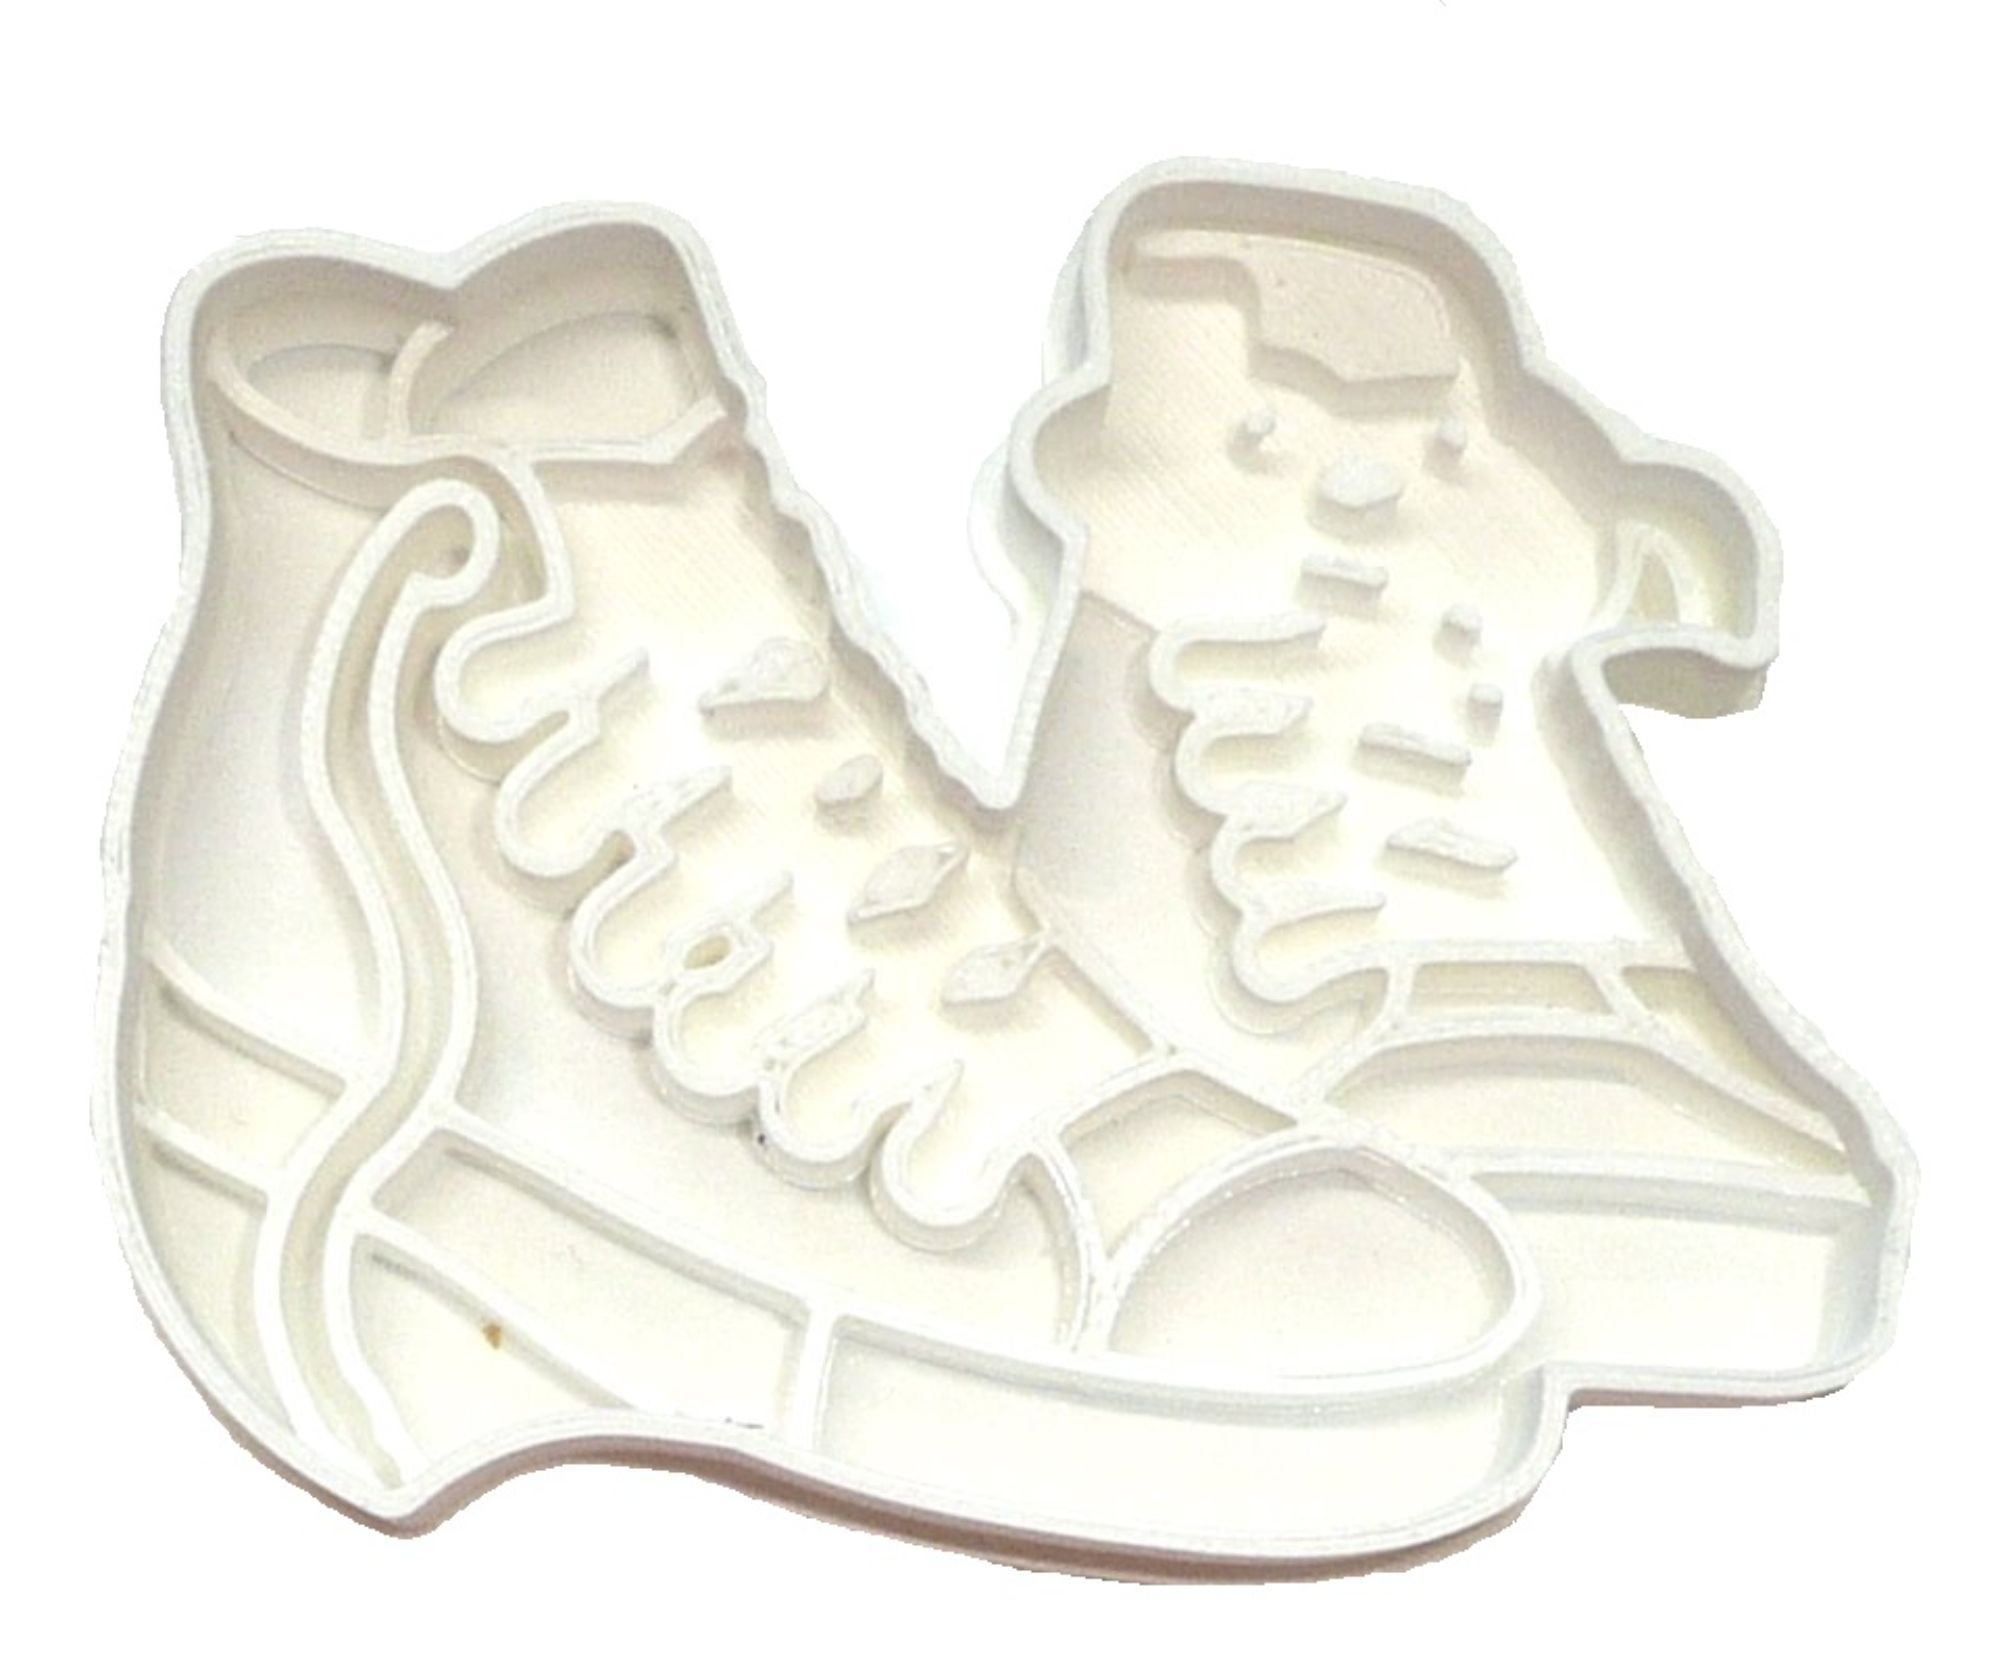 Sneaker Cookie Cutter and Stamp Set Sneaker Cookie Cutter Shoe Cookie Cutter  3D Printed Cookie Cutter Bakerdreams - Etsy UK